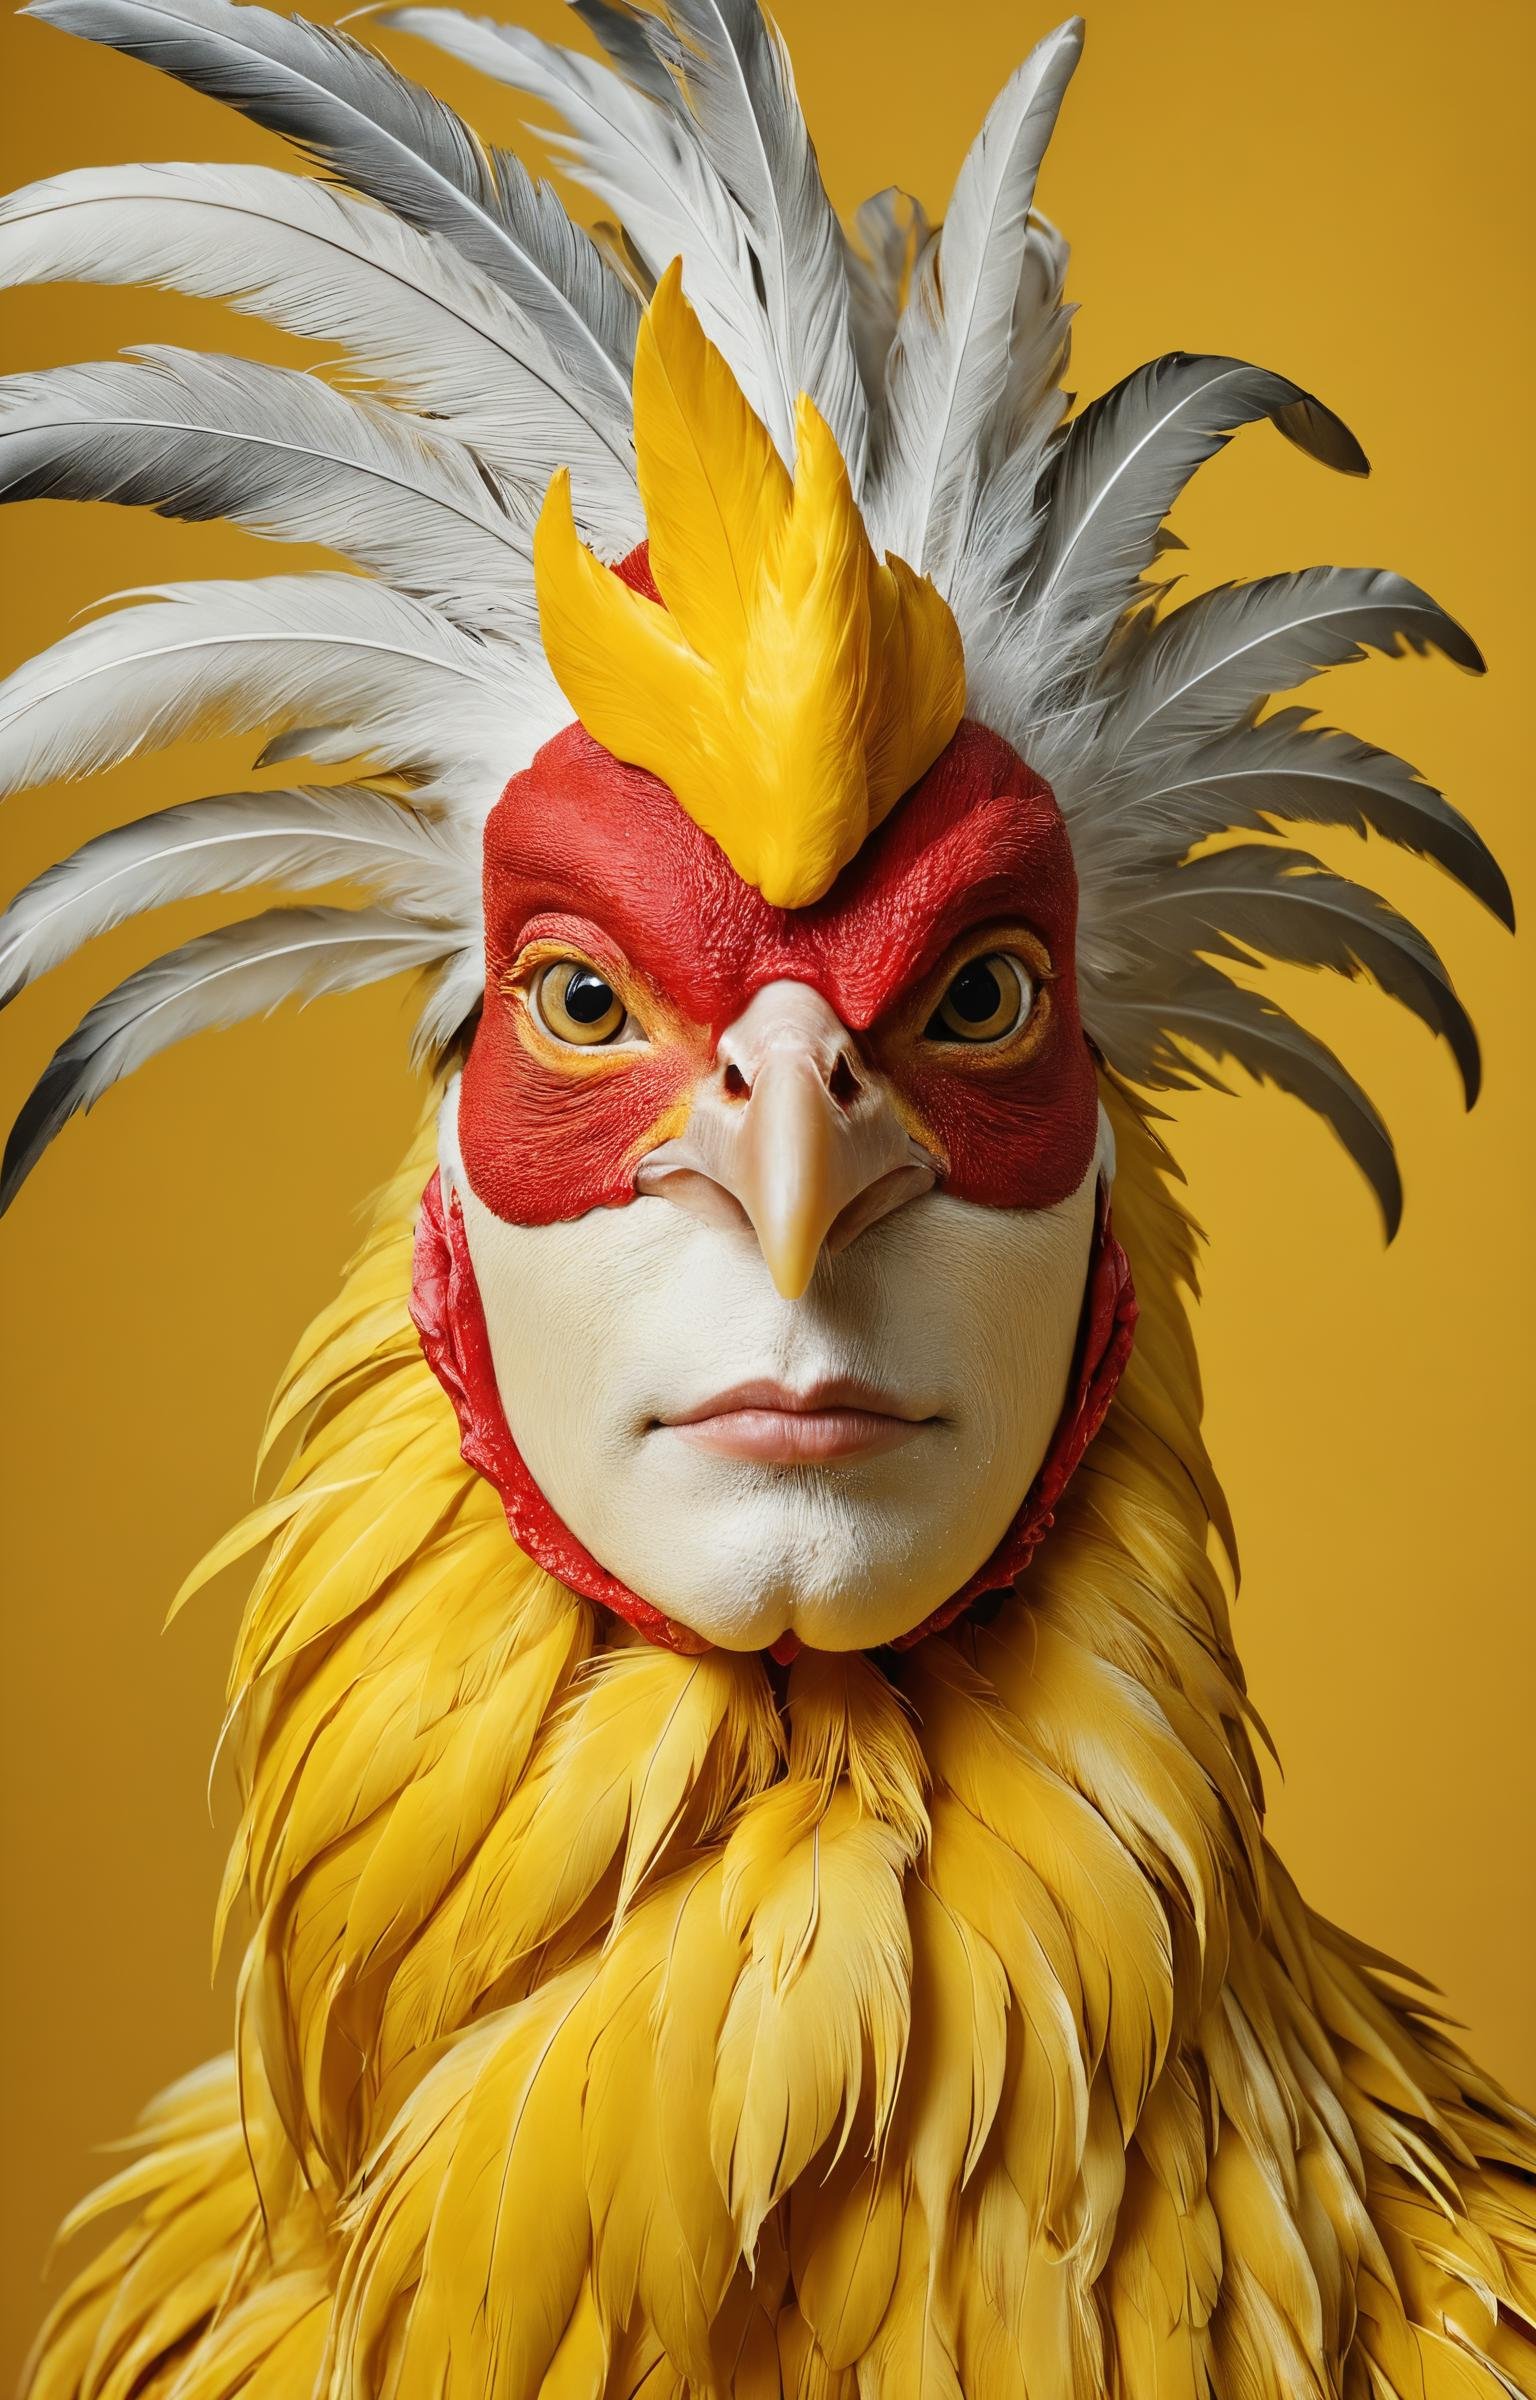 woman have yellow rooster face,face covered with feathers, in the style of pop art-inspired visuals,oddity, naturalistic bird portraits, schlieren photography, anne dewailly,yellow and red, soft-focus portraits, hyperrealistic wildlife portraits, insanely detailed, light yellow solid color background, <lora:- SDXL - creepy_n_freaks_V1.0:0.4>